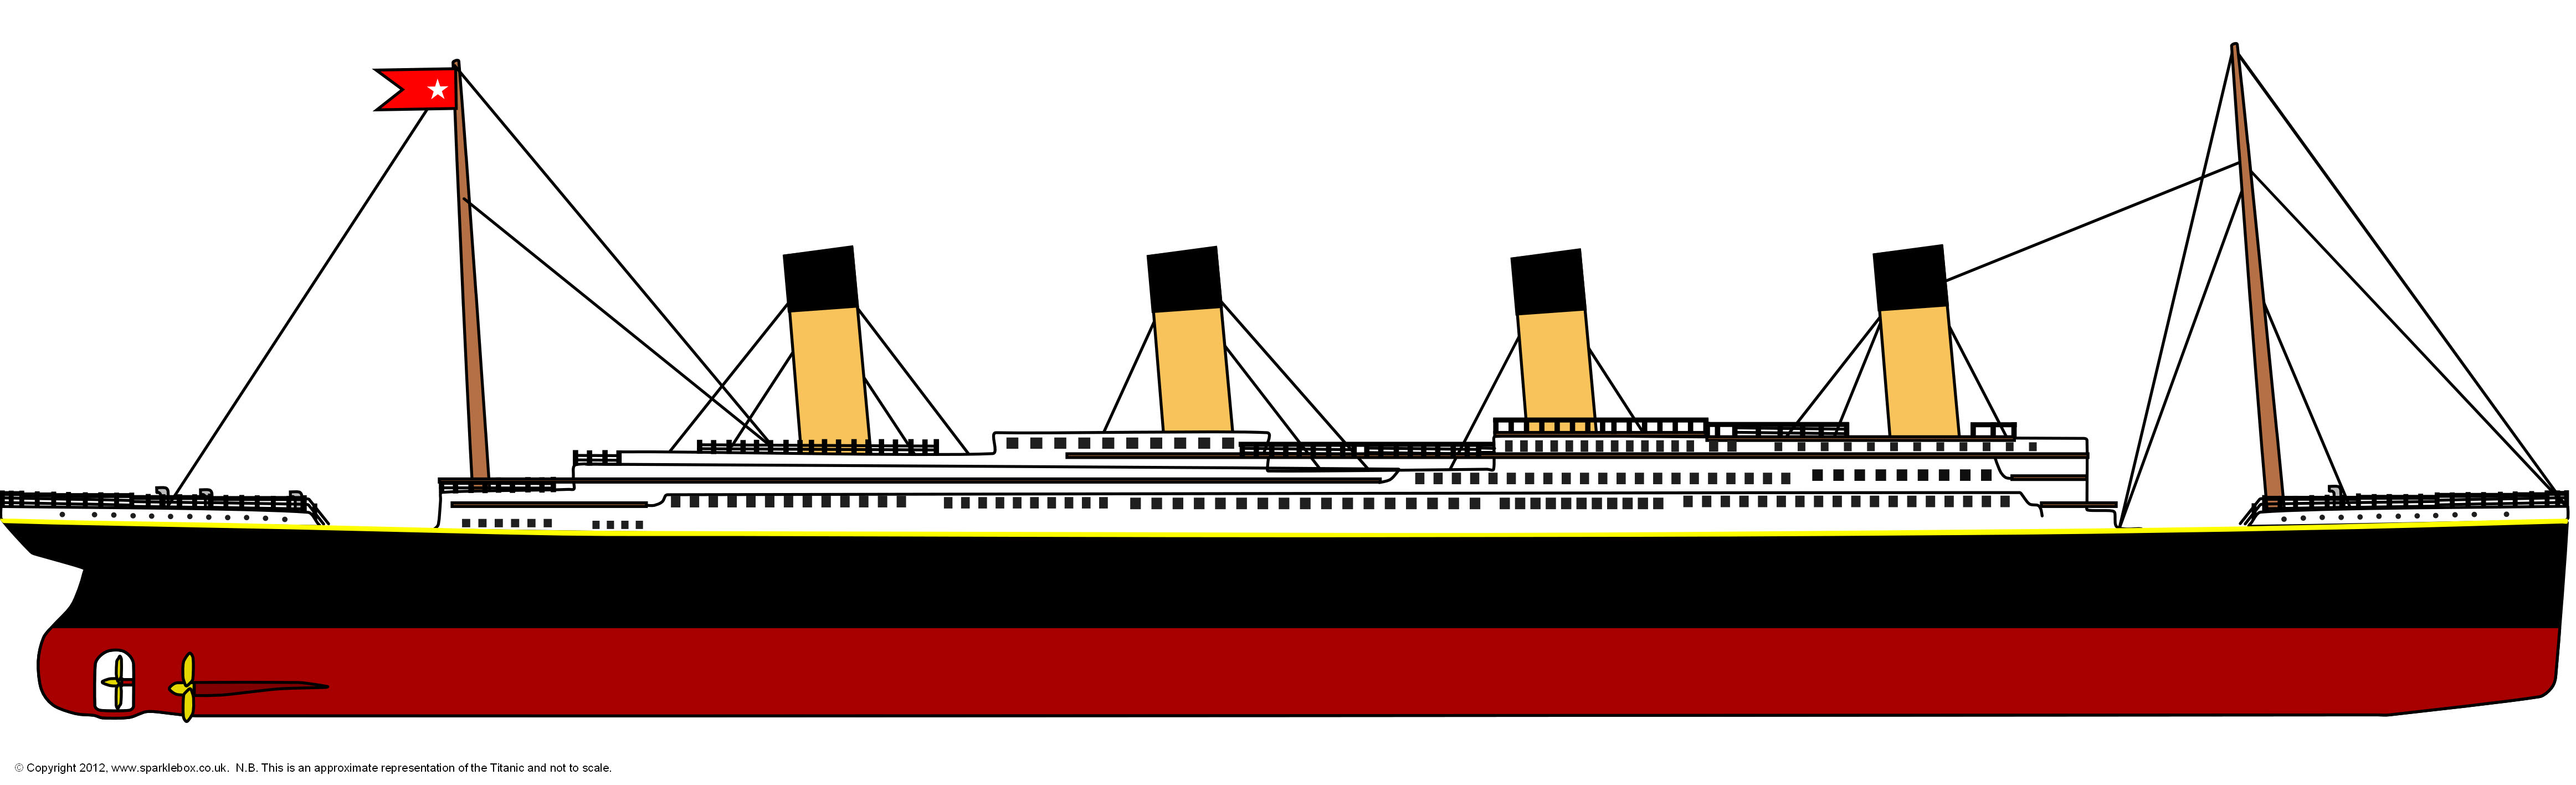 Large Titanic Picture for Display (SB7697) - SparkleBox